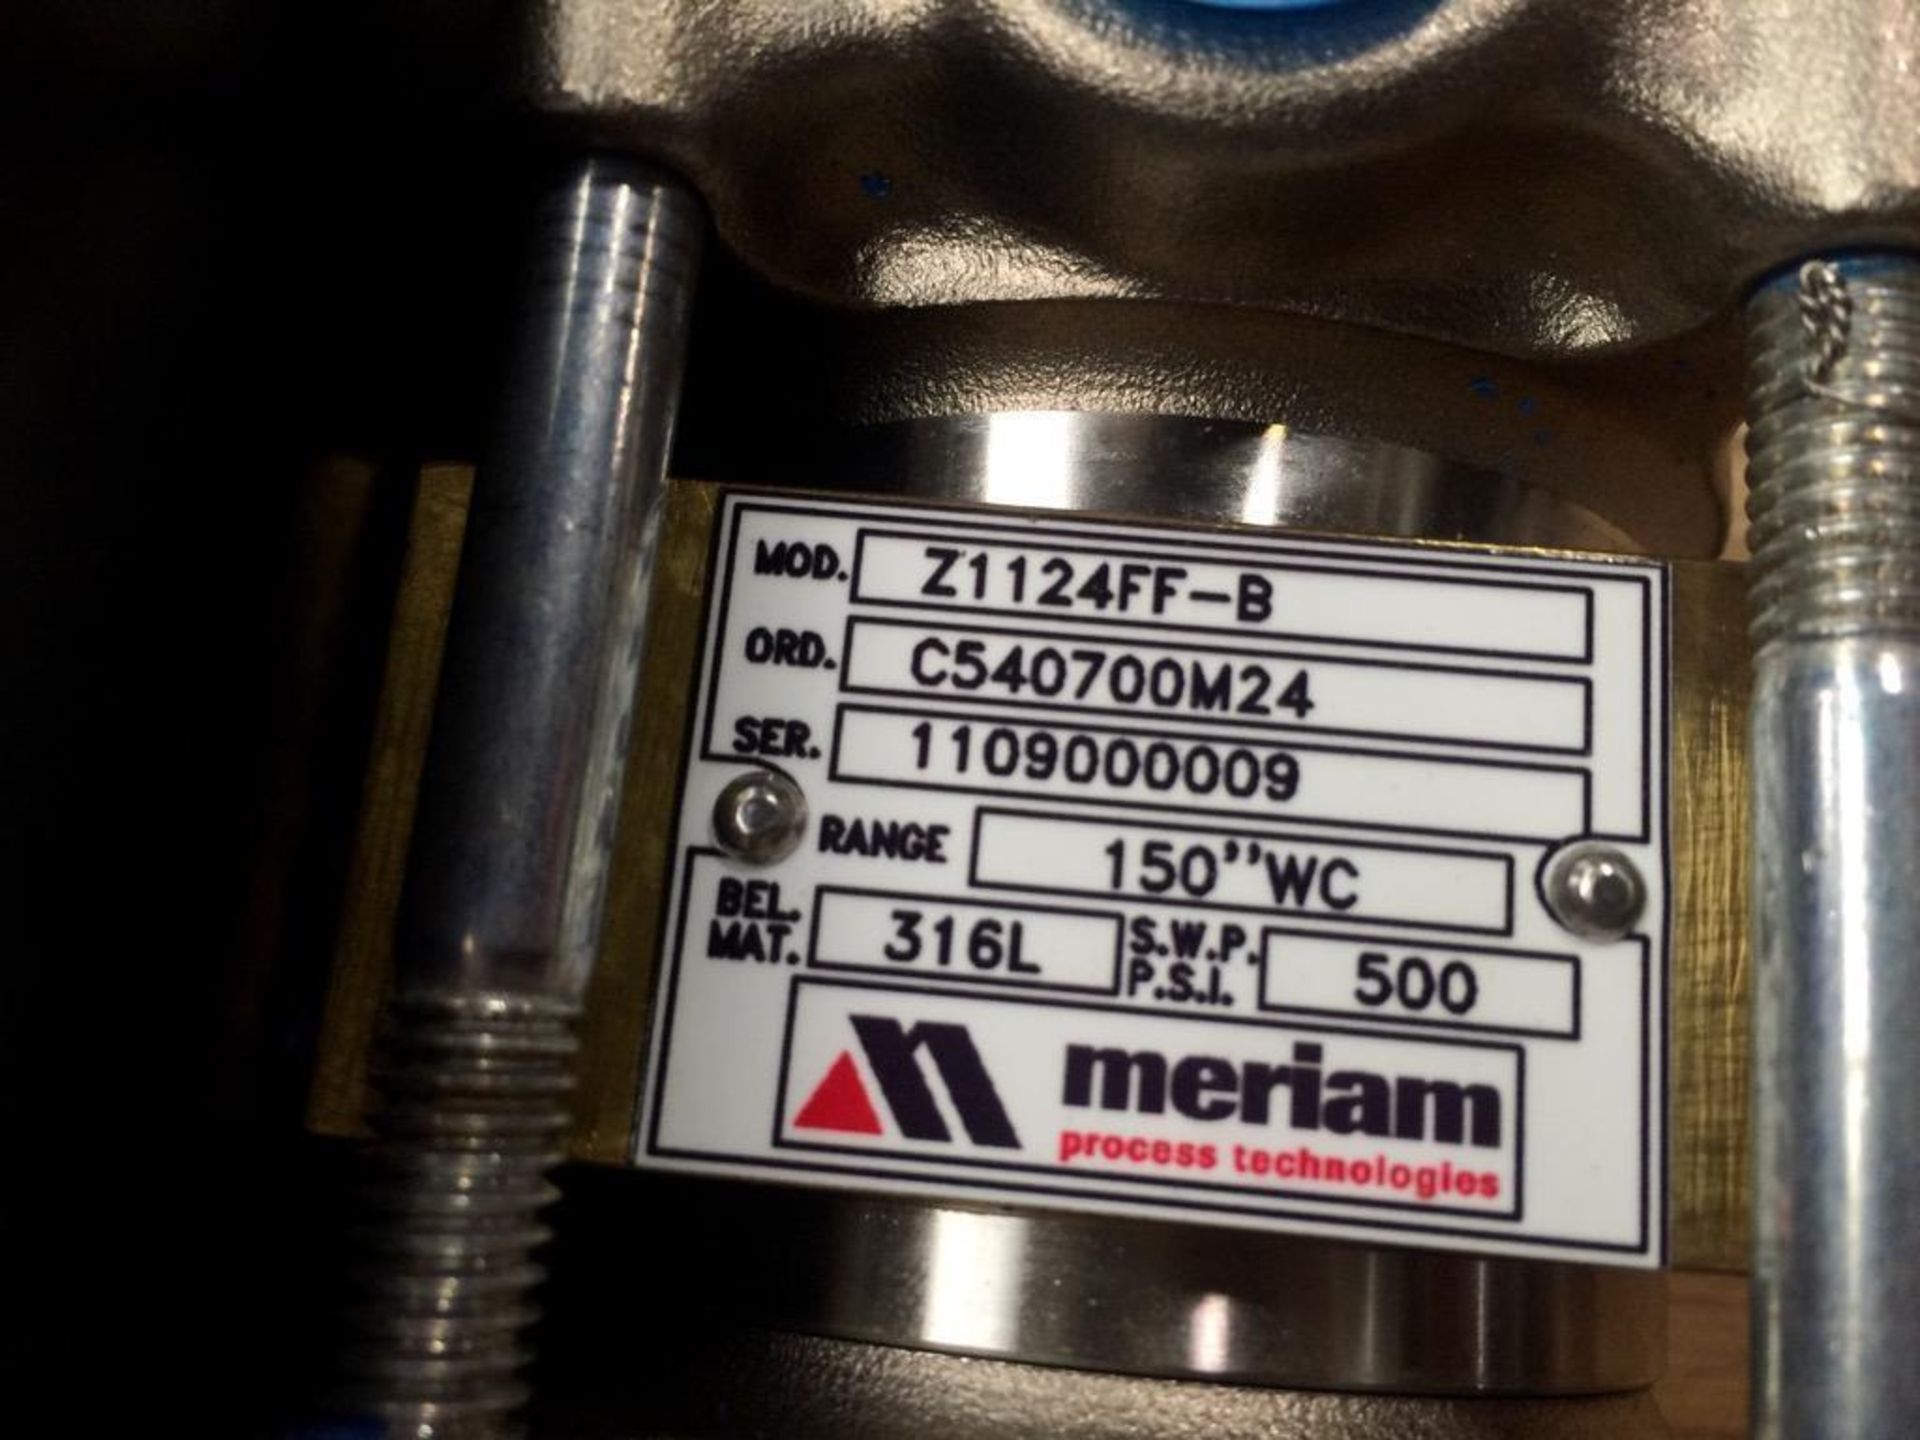 (4) New in Box Meriam Z1124FF-B Bellows Gauges for Differential Pressure Flow and Level. 4-1/2" Dial - Image 7 of 8